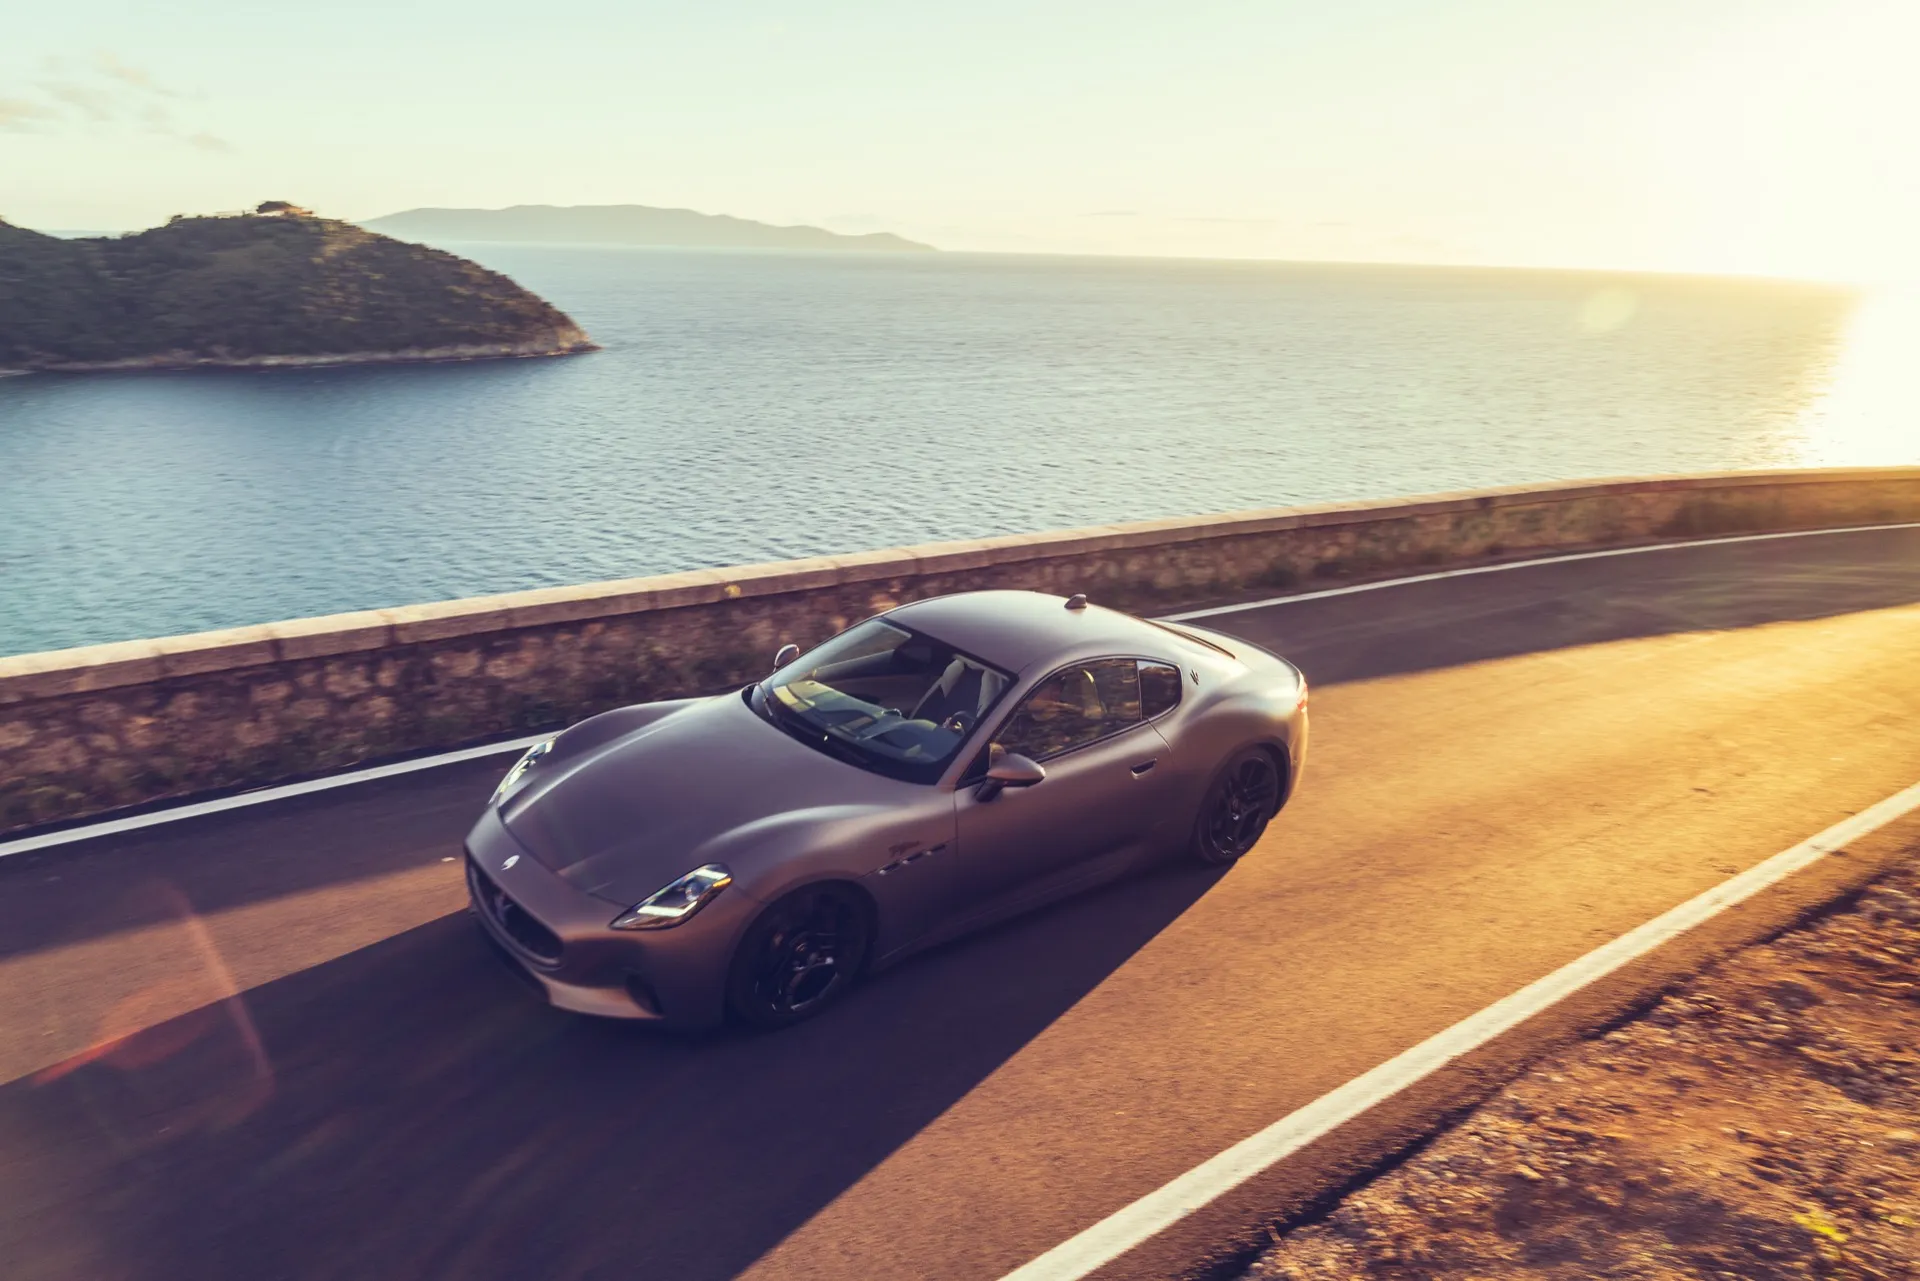 Maserati charges up for its first EV, the GranTurismo Folgore